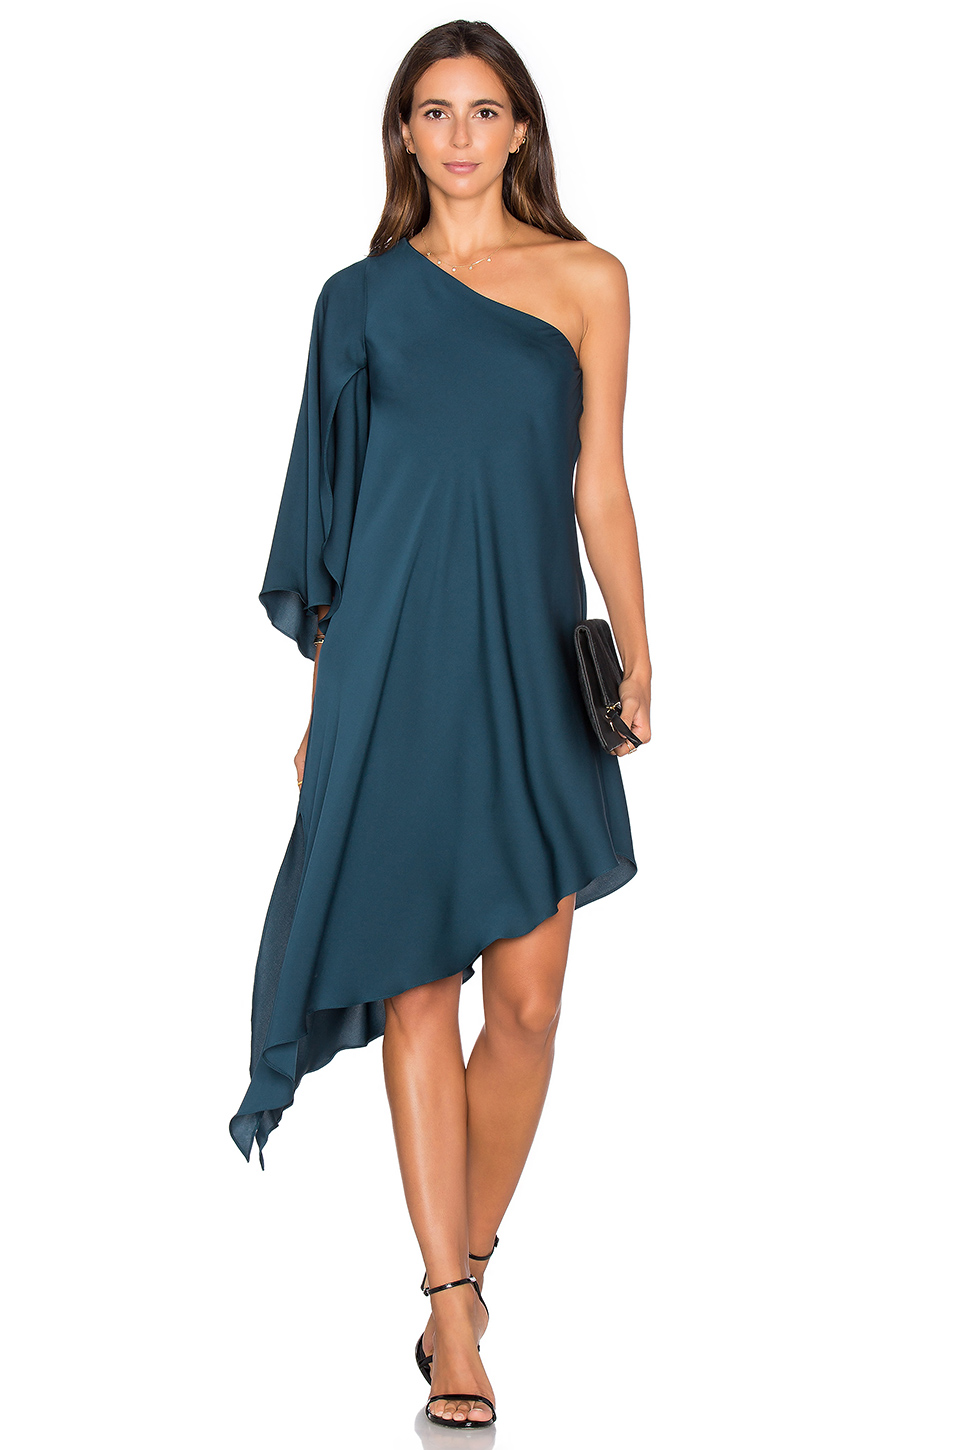 Milly Tori One Shoulder Dress In Peacock | ModeSens